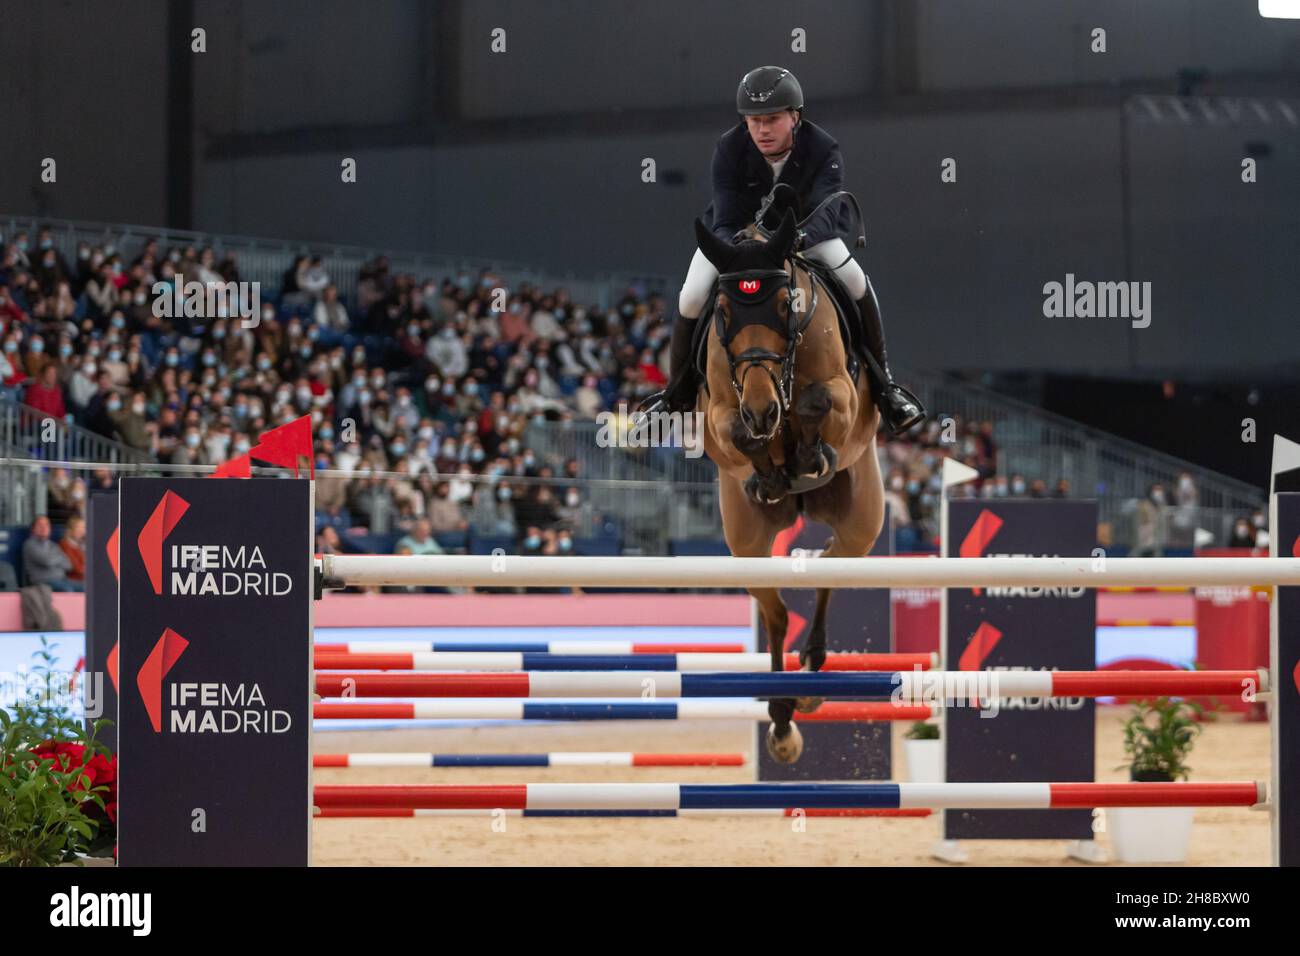 Madrid, Spain. 28th Nov, 2021. Gerrit Nieberg during FEI Dressage World Cup Short Grand Prix Grupo Eulen Trophy at Ifema Madrid Horse Week celebrated in Madrid. Nov 26th 2021 (Photo by Juan Carlos García Mate/Pacific Press) Credit: Pacific Press Media Production Corp./Alamy Live News Stock Photo